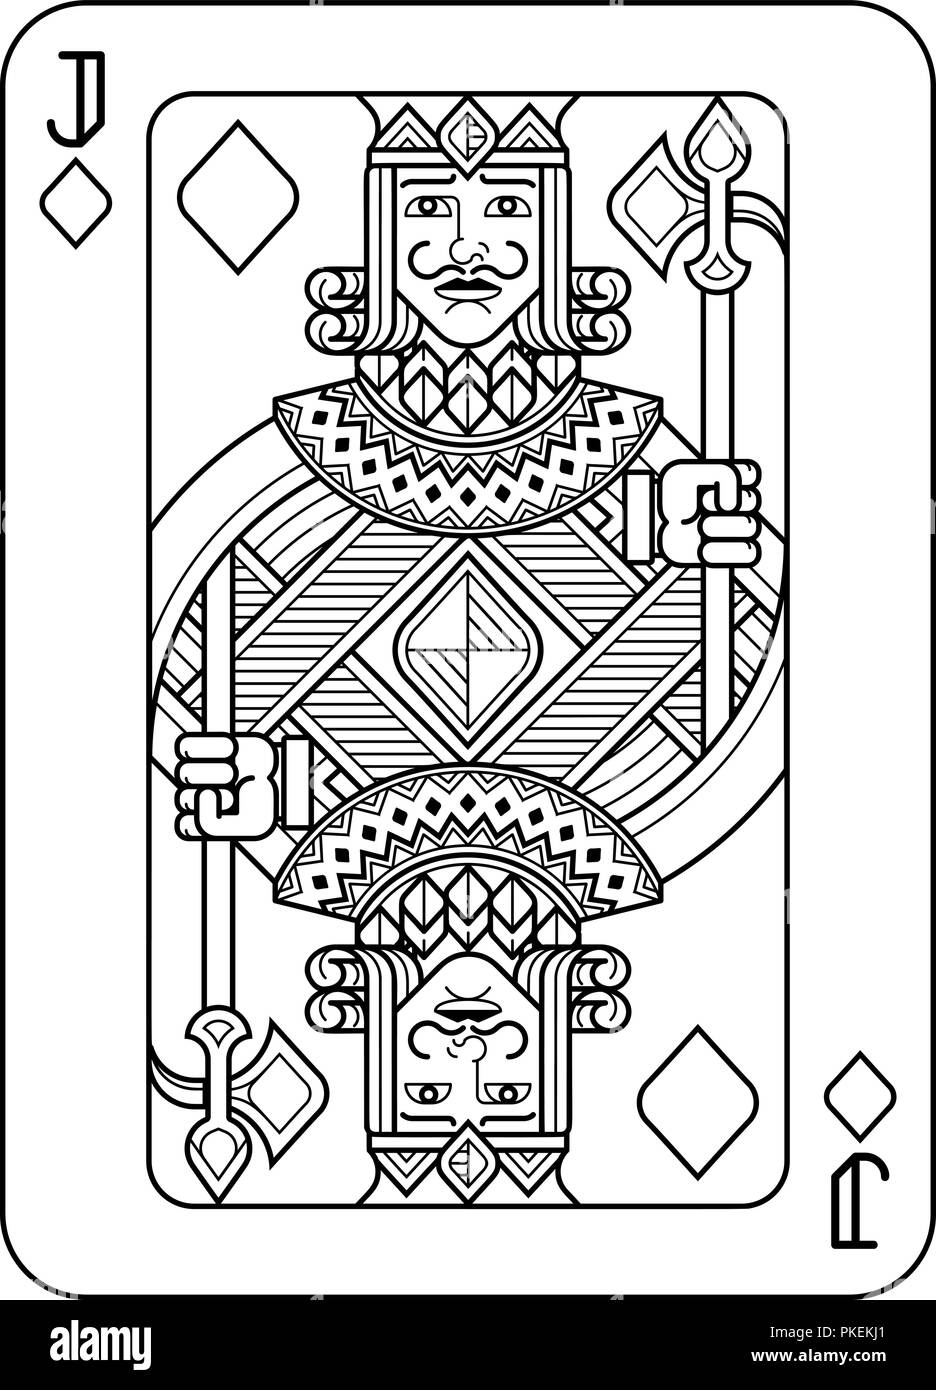 Playing Card Jack of Diamonds Black and White Stock Vector